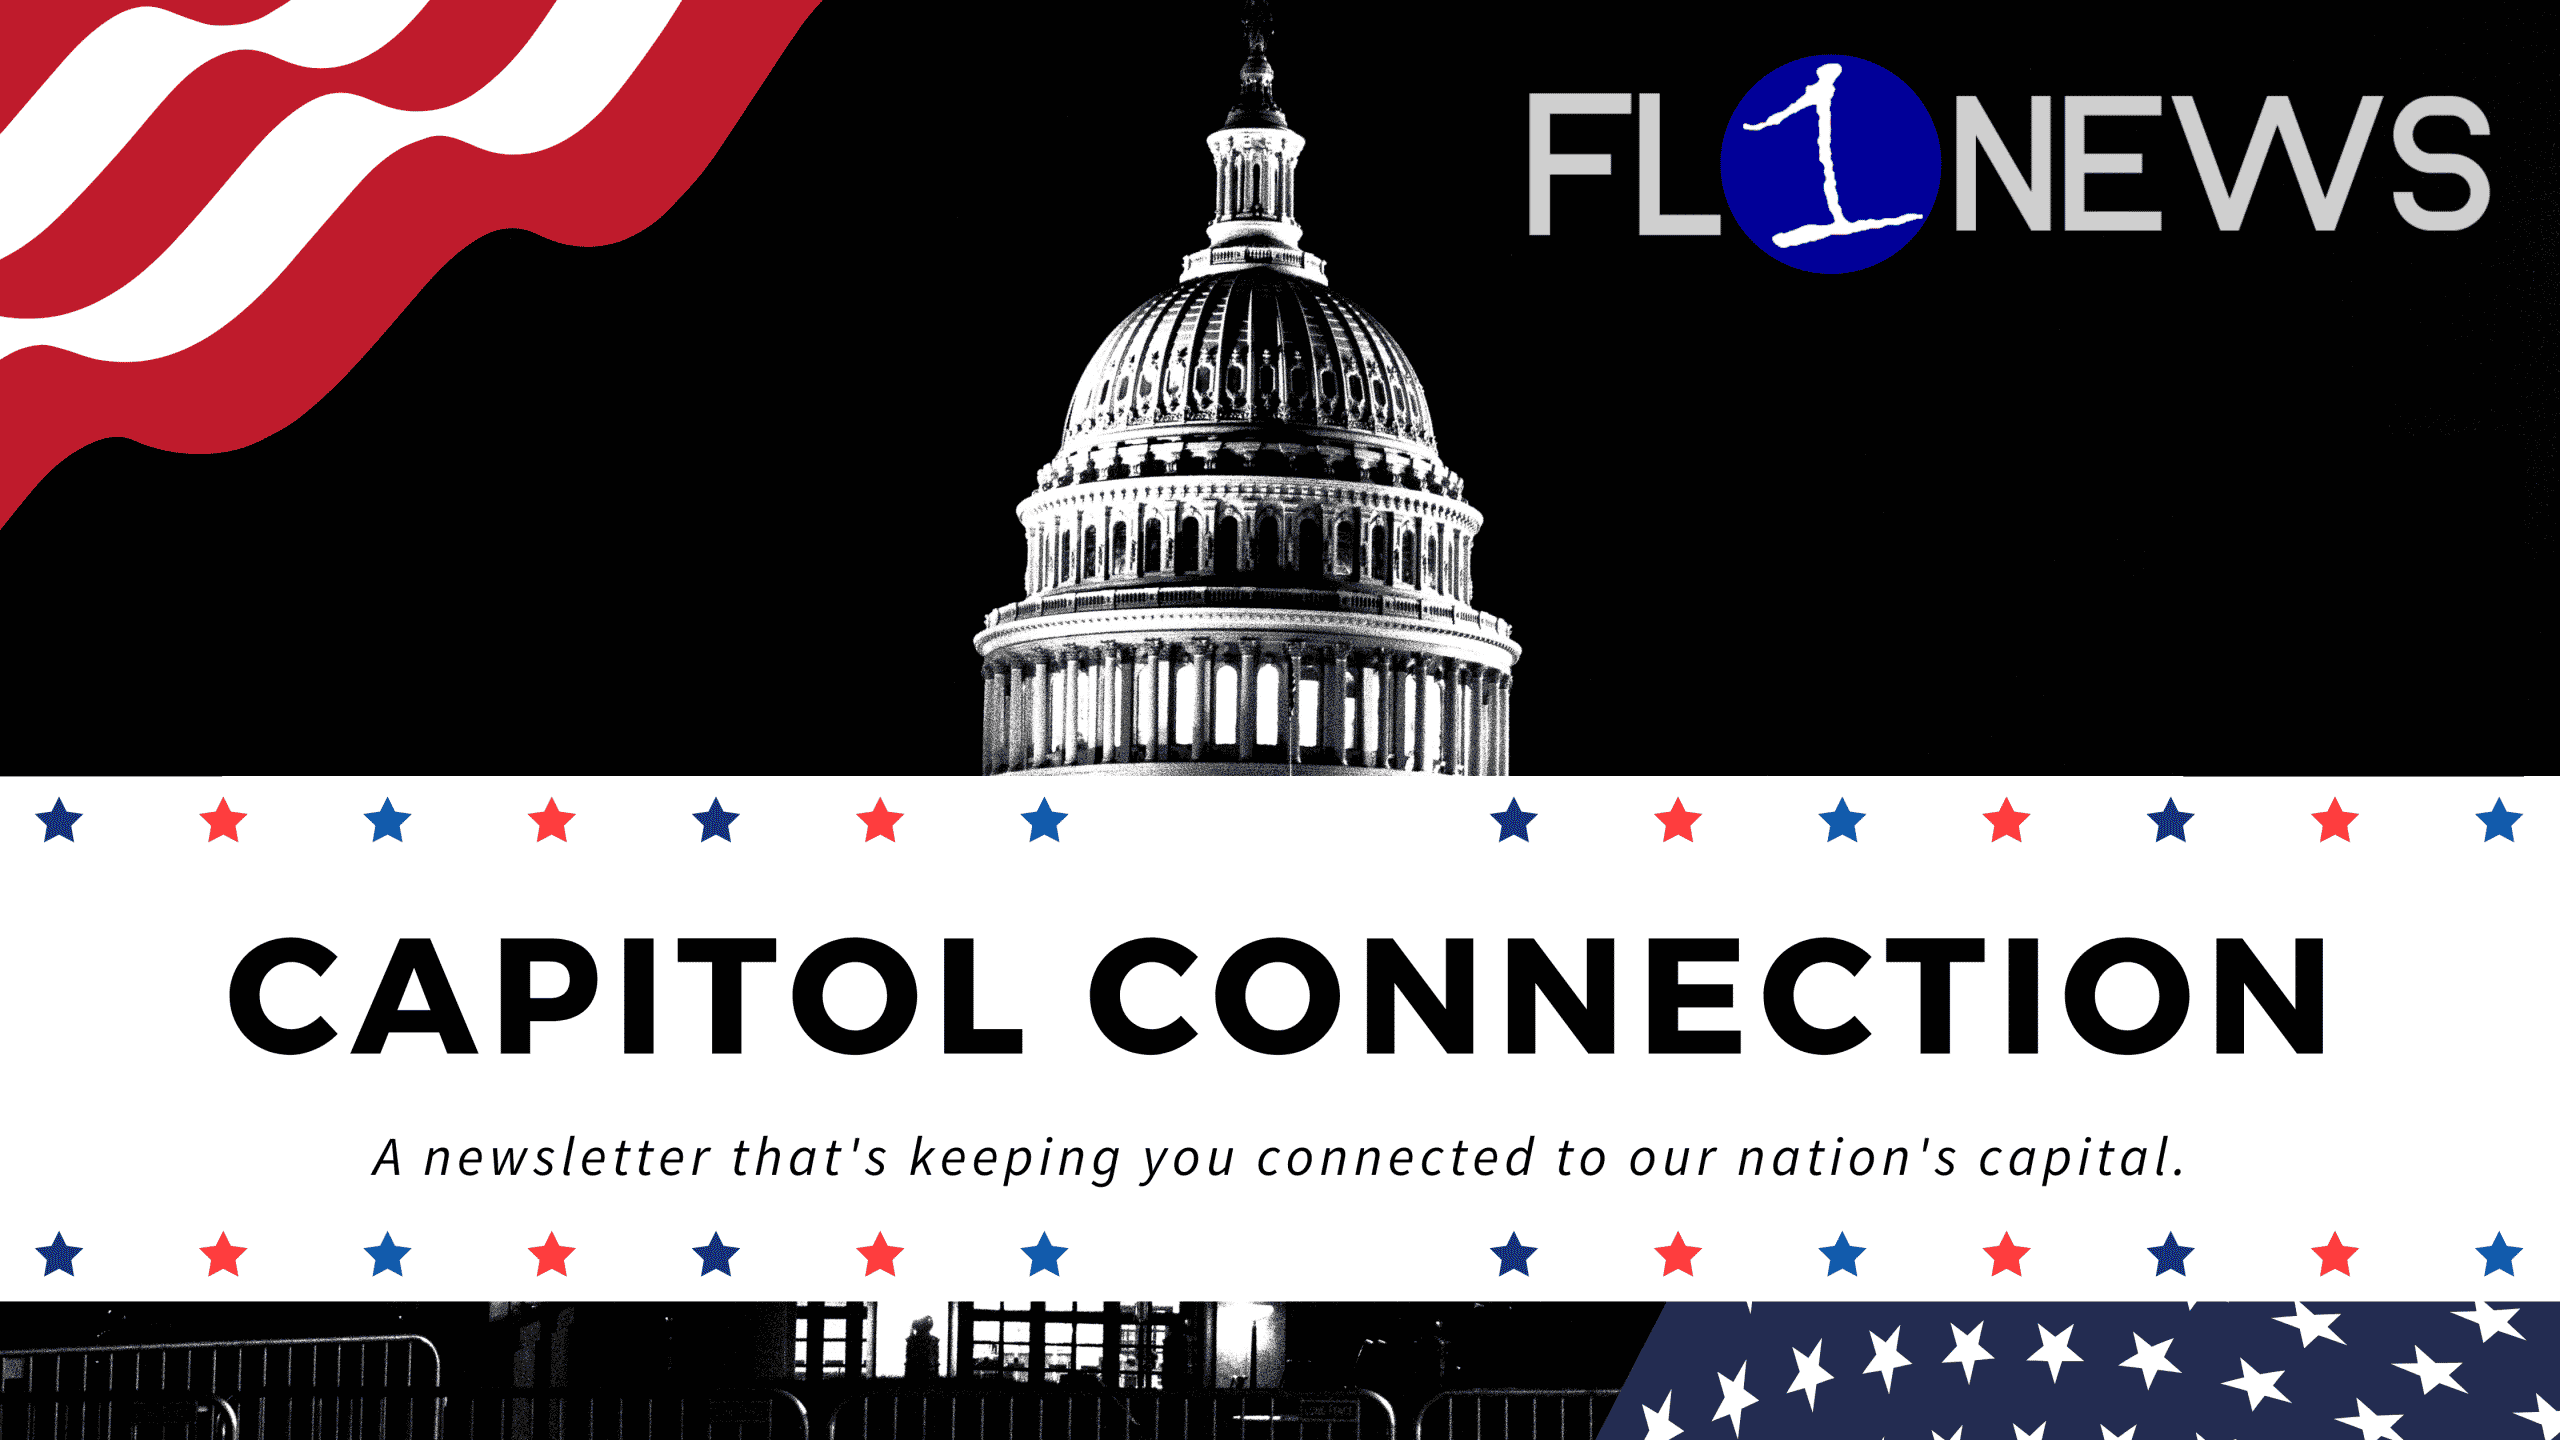 CAPITOL CONNECTION: Another offi